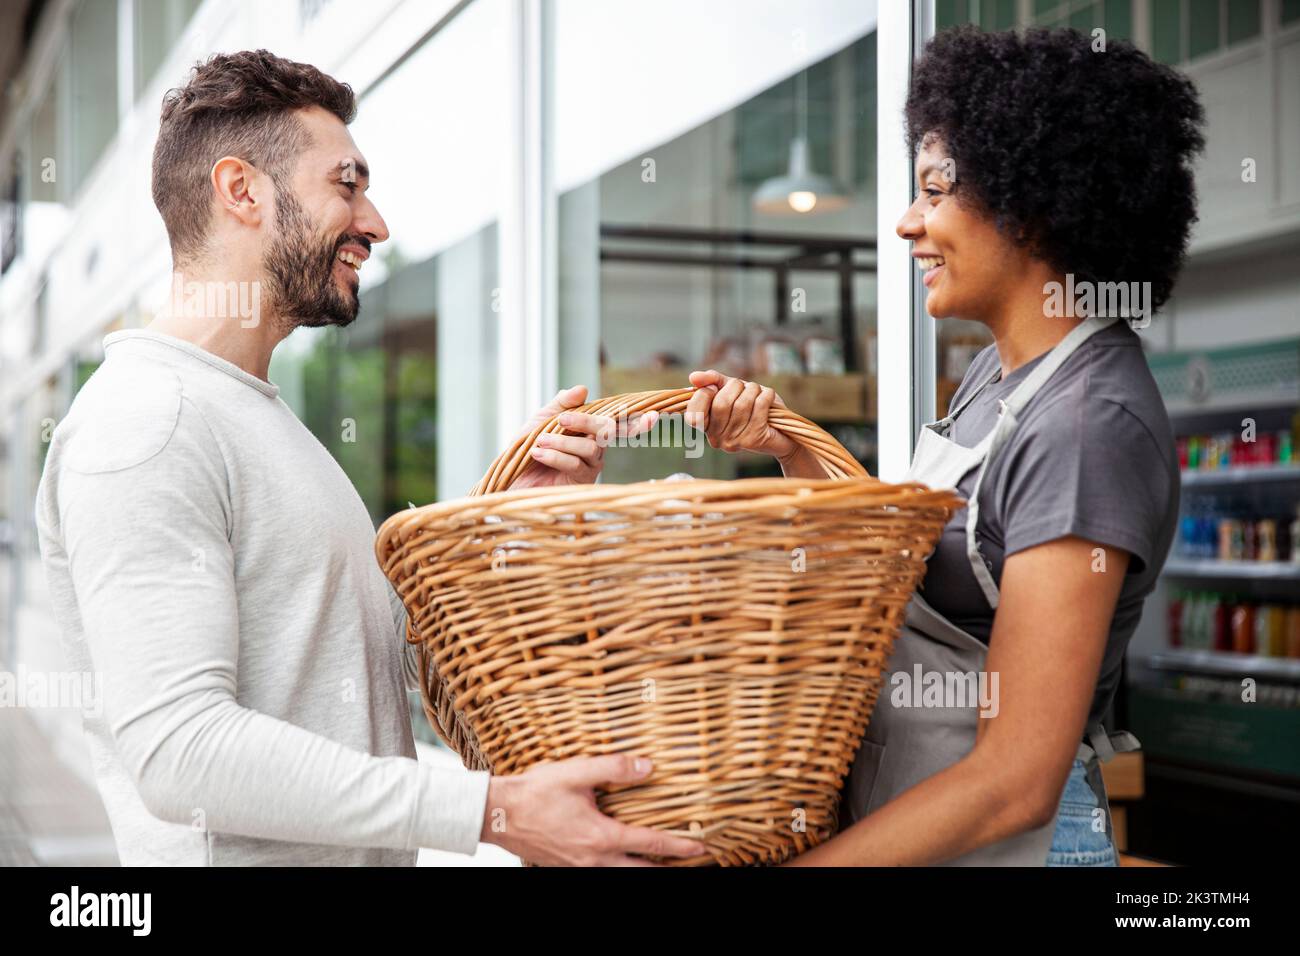 Male bakery worker delivering basket to colleague Stock Photo